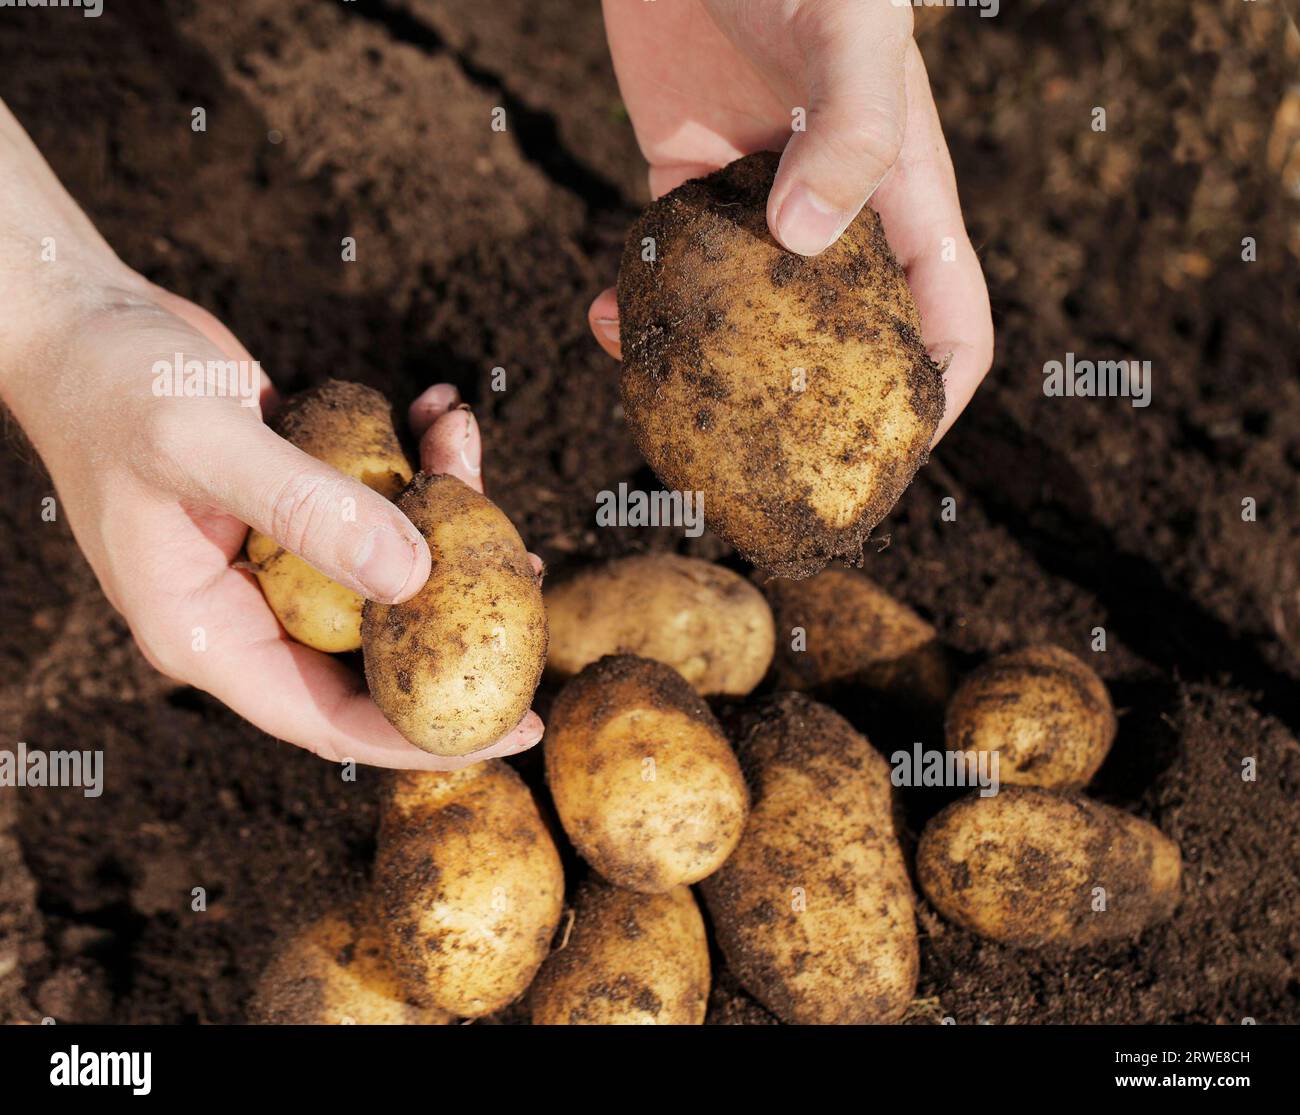 Farmer holding potatoes in his hands Stock Photo